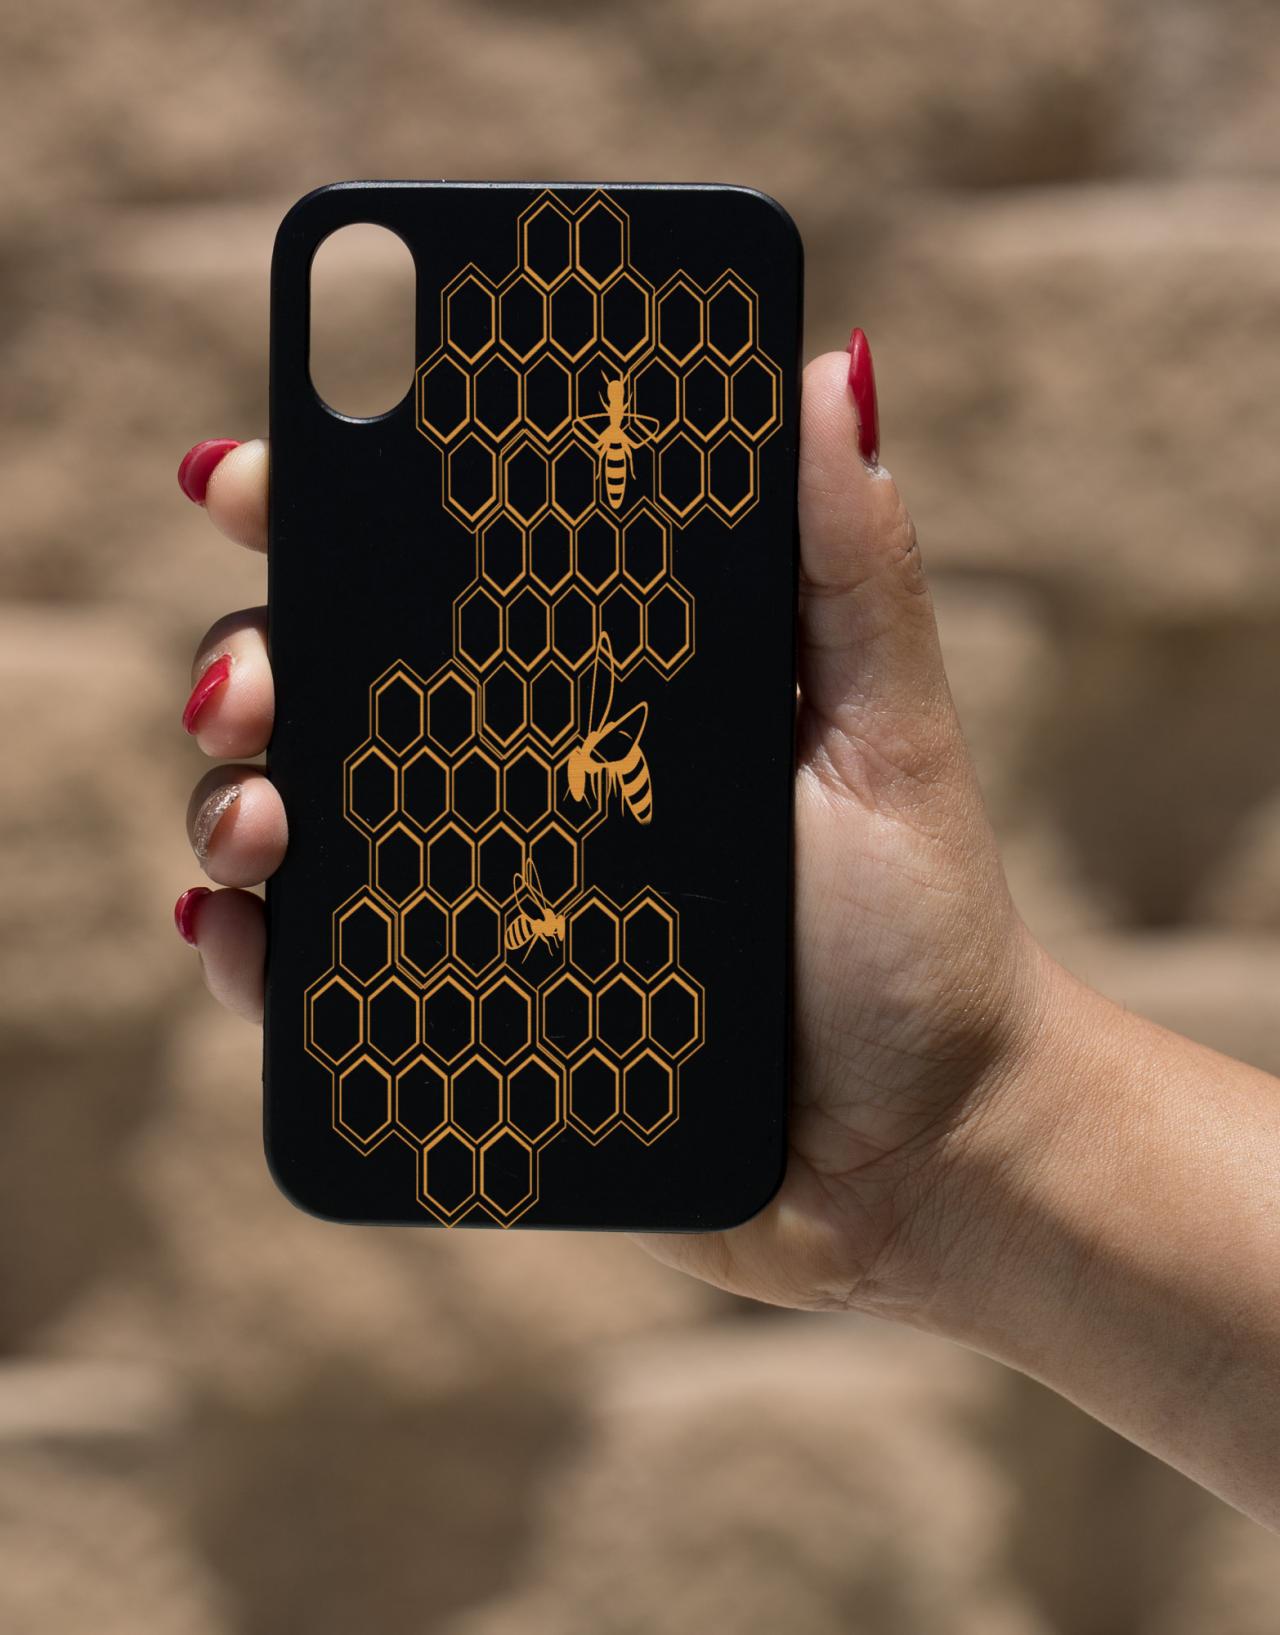 Honey Bee I Phone X Case, Engraved I phone X case, Wooden Engraved I phone X Case, I phone case, Beautiful Gift for here, unique